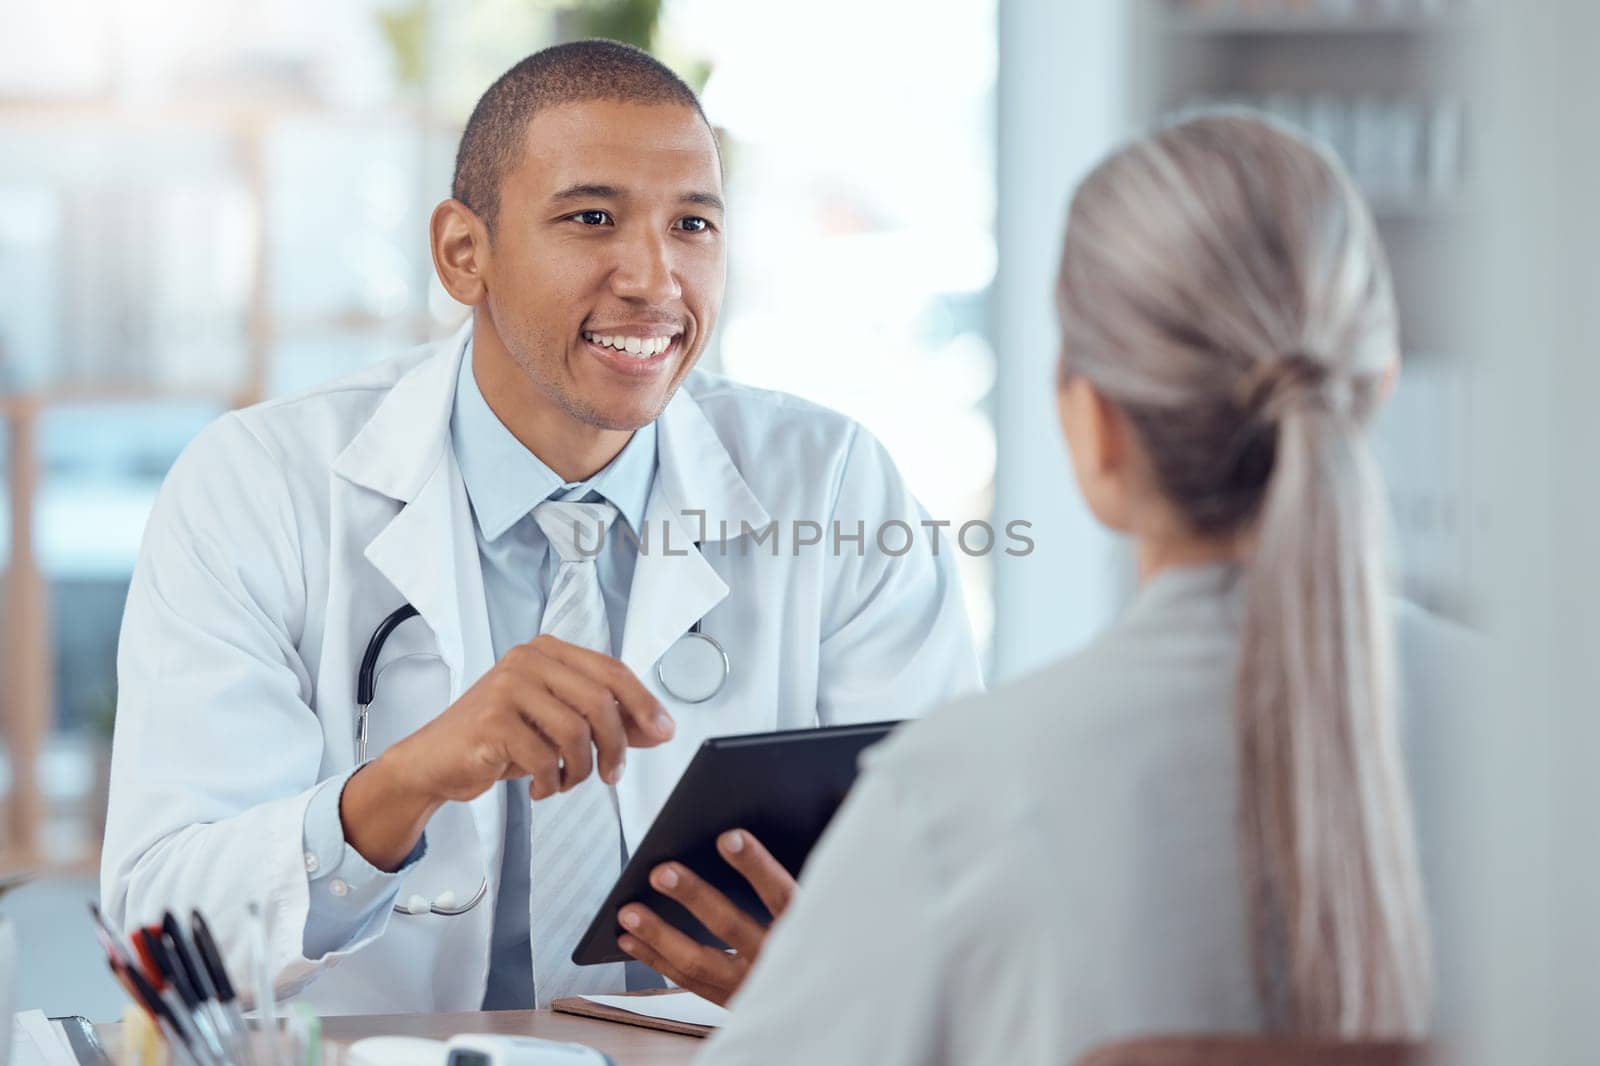 Tablet, office and doctor consulting a patient in a health conversation or communication during medical consultation. Medicine, healthcare and professional talking to person for results in a clinic.